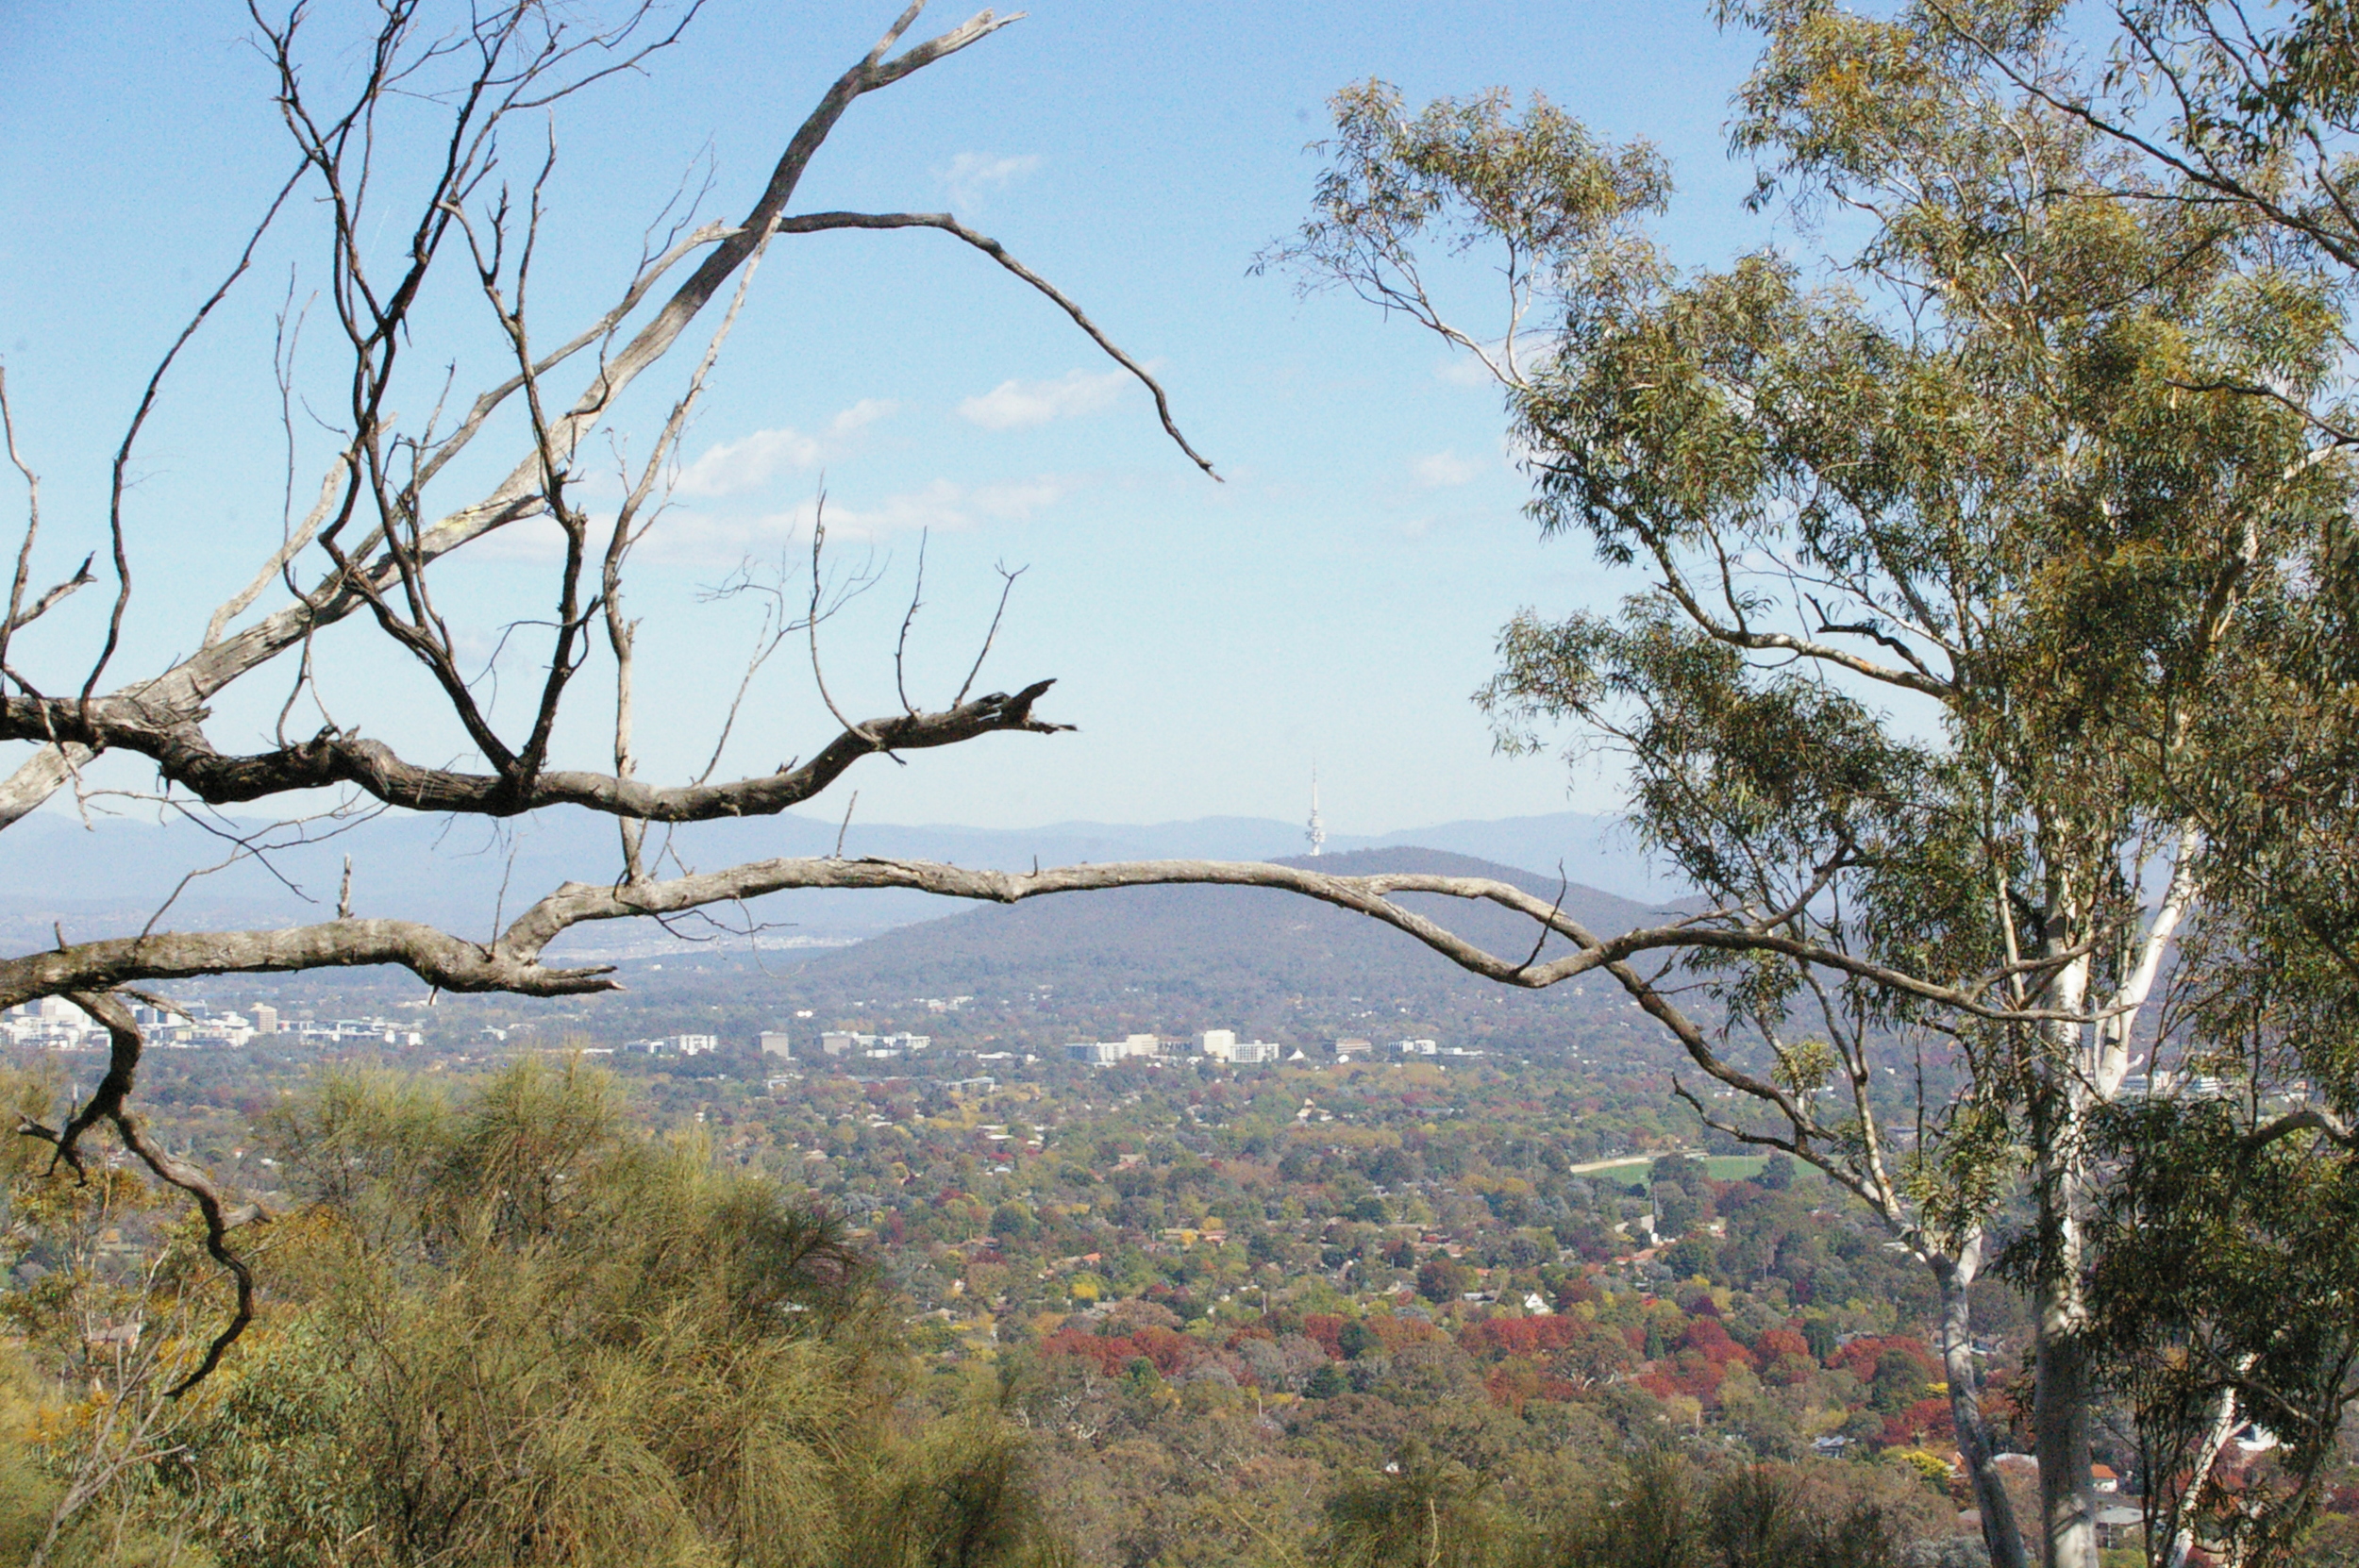  Canberra city through the trees, Black Mountain and Telstra Tower visible. Autumn colours just starting to come through. 